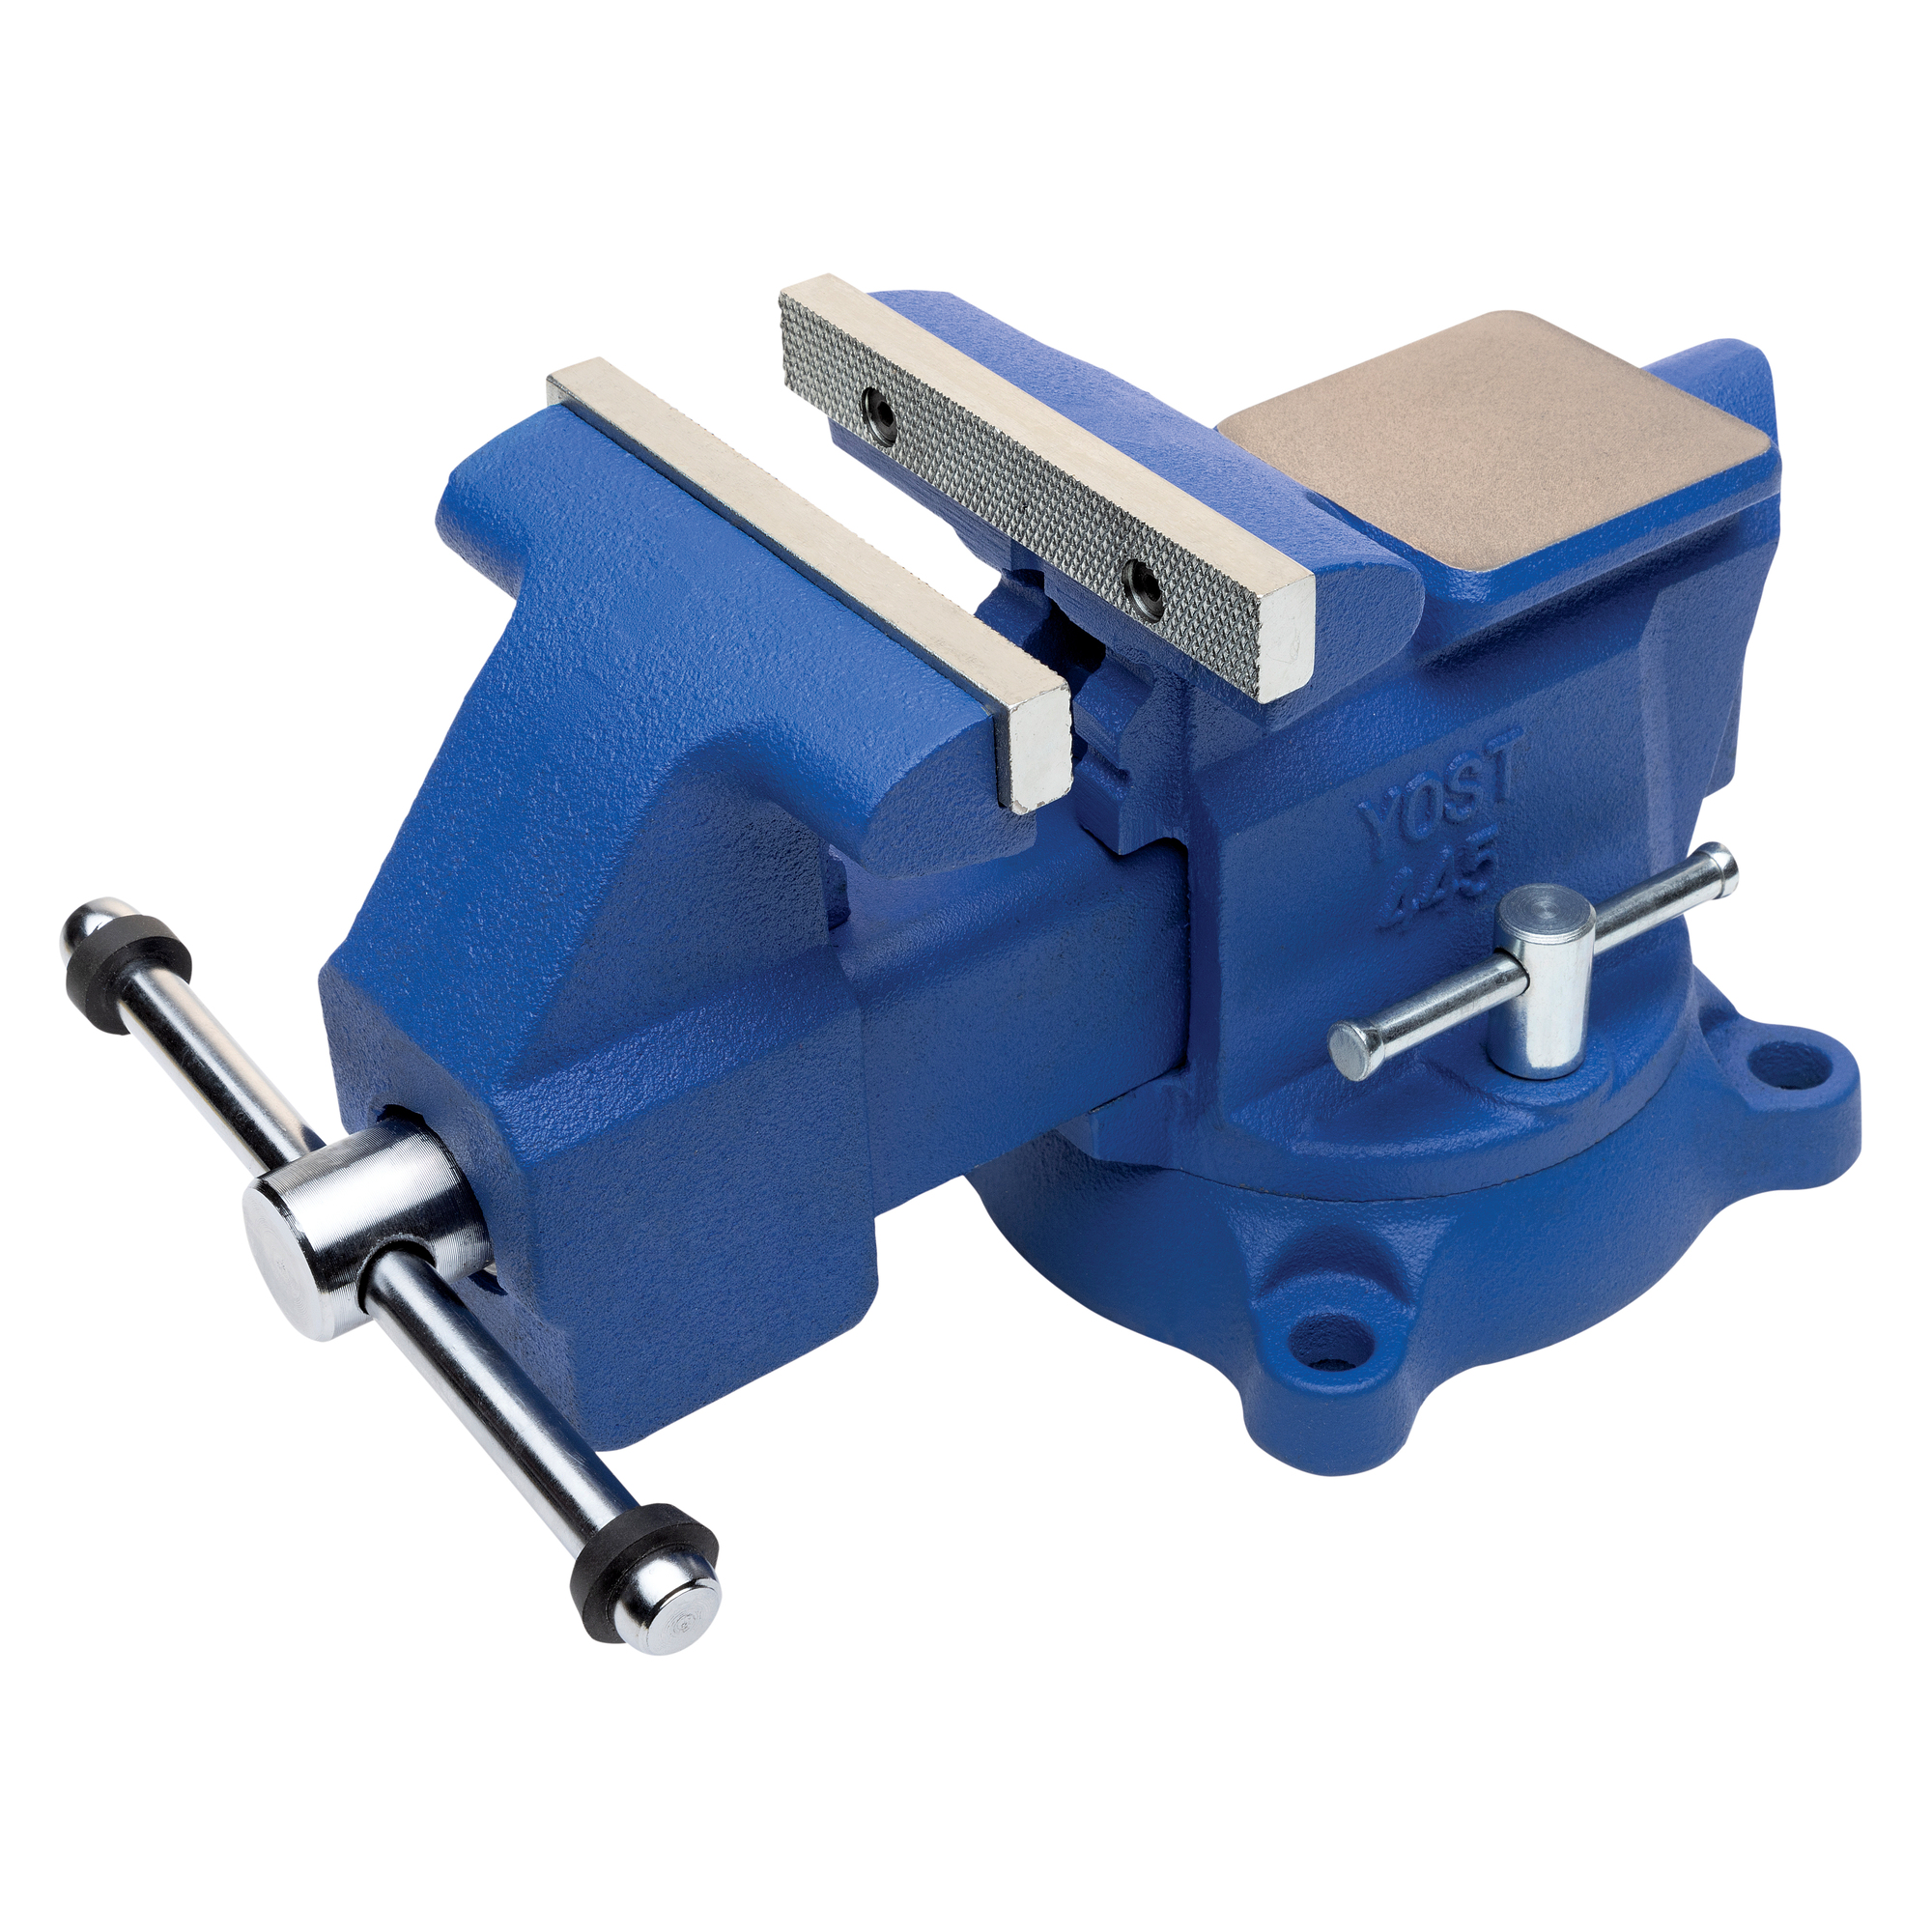 Yost Vises, 4.5Inch Utility Bench Vise, Jaw Width 4.5 in, Jaw Capacity 4 in, Material Cast Iron, Model 445